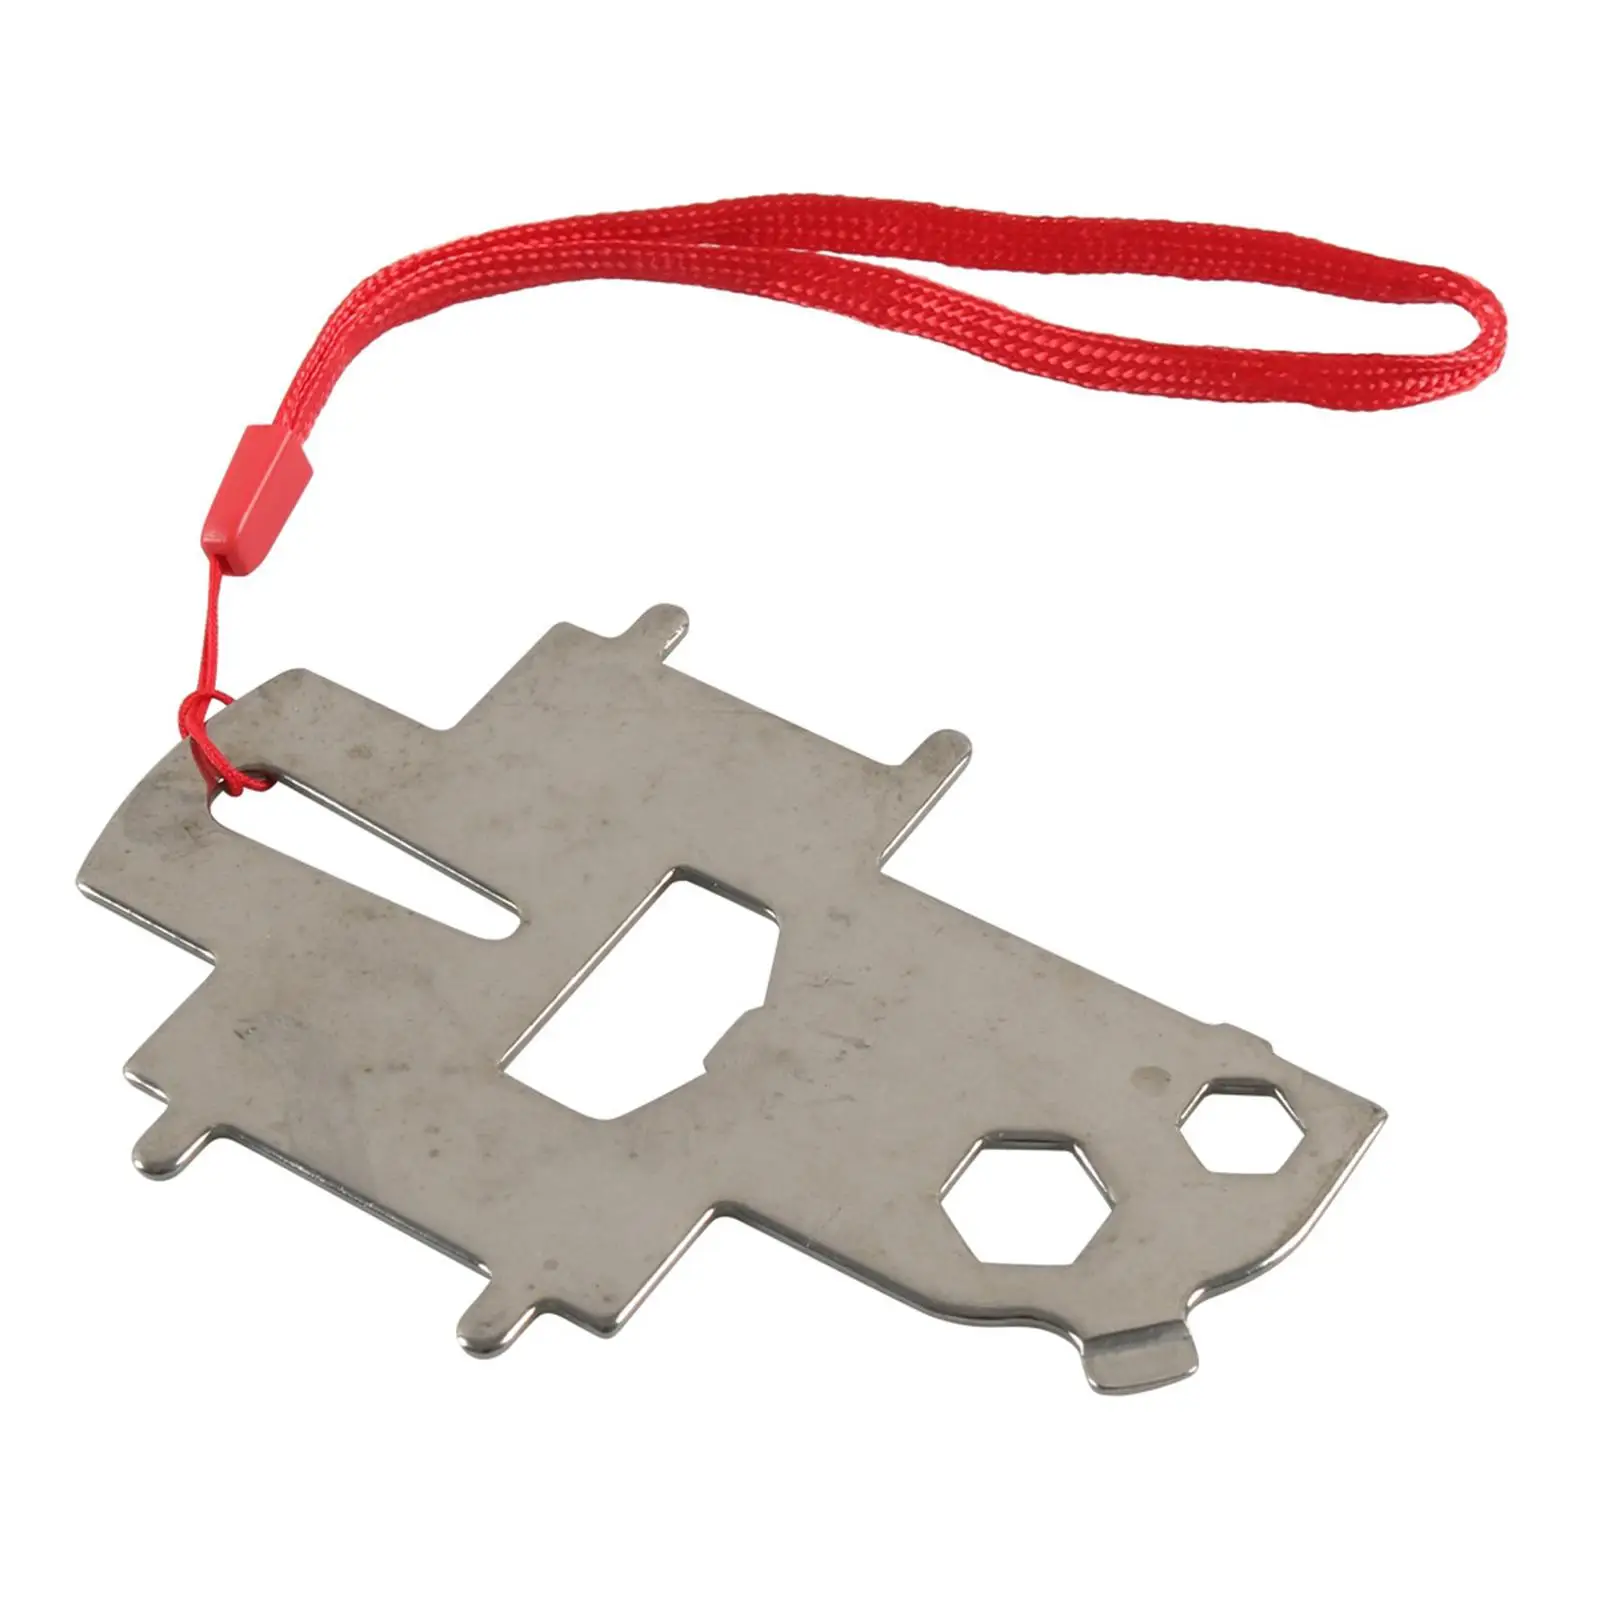 3 Pieces Deck Fill Plate Key Replaces Spare Tool Parts for Plug